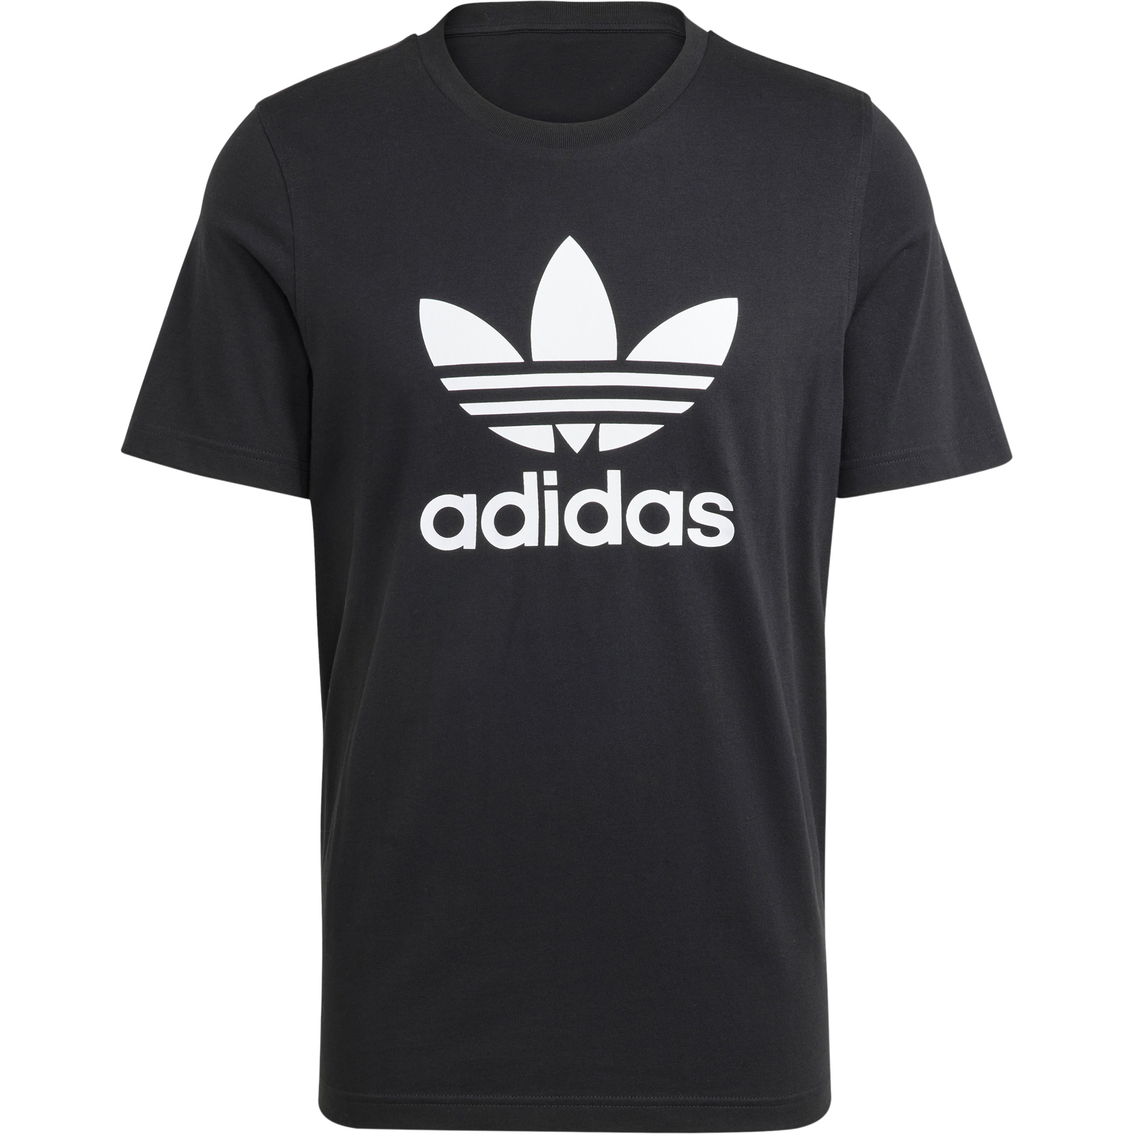 Adidas Trefoil Tee | Shirts | Clothing & Accessories | Shop The Exchange